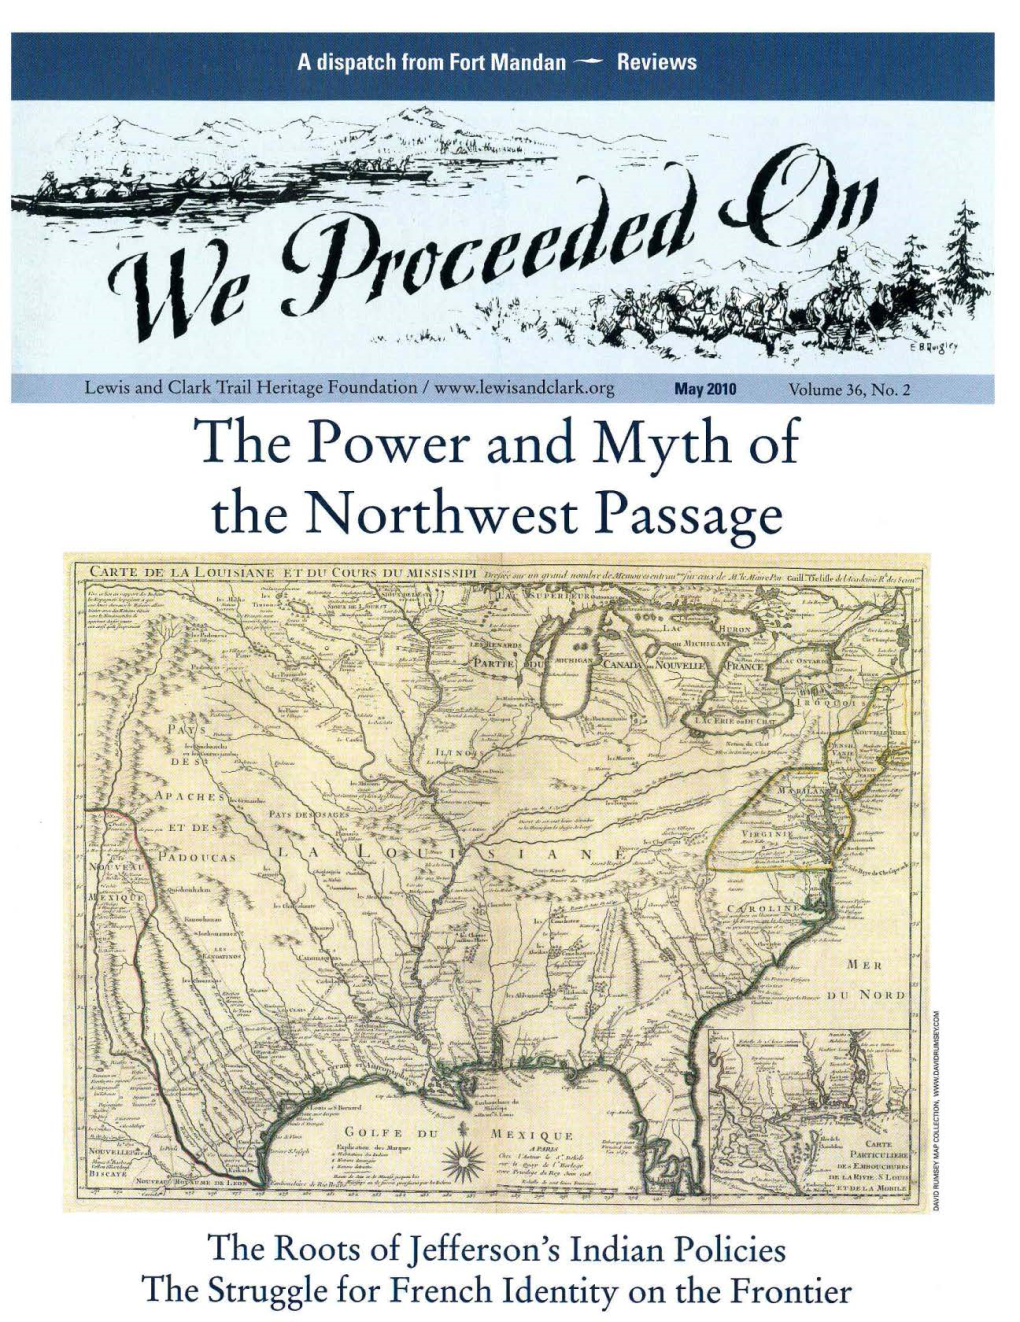 The Power and Myth of the Northwest Passage